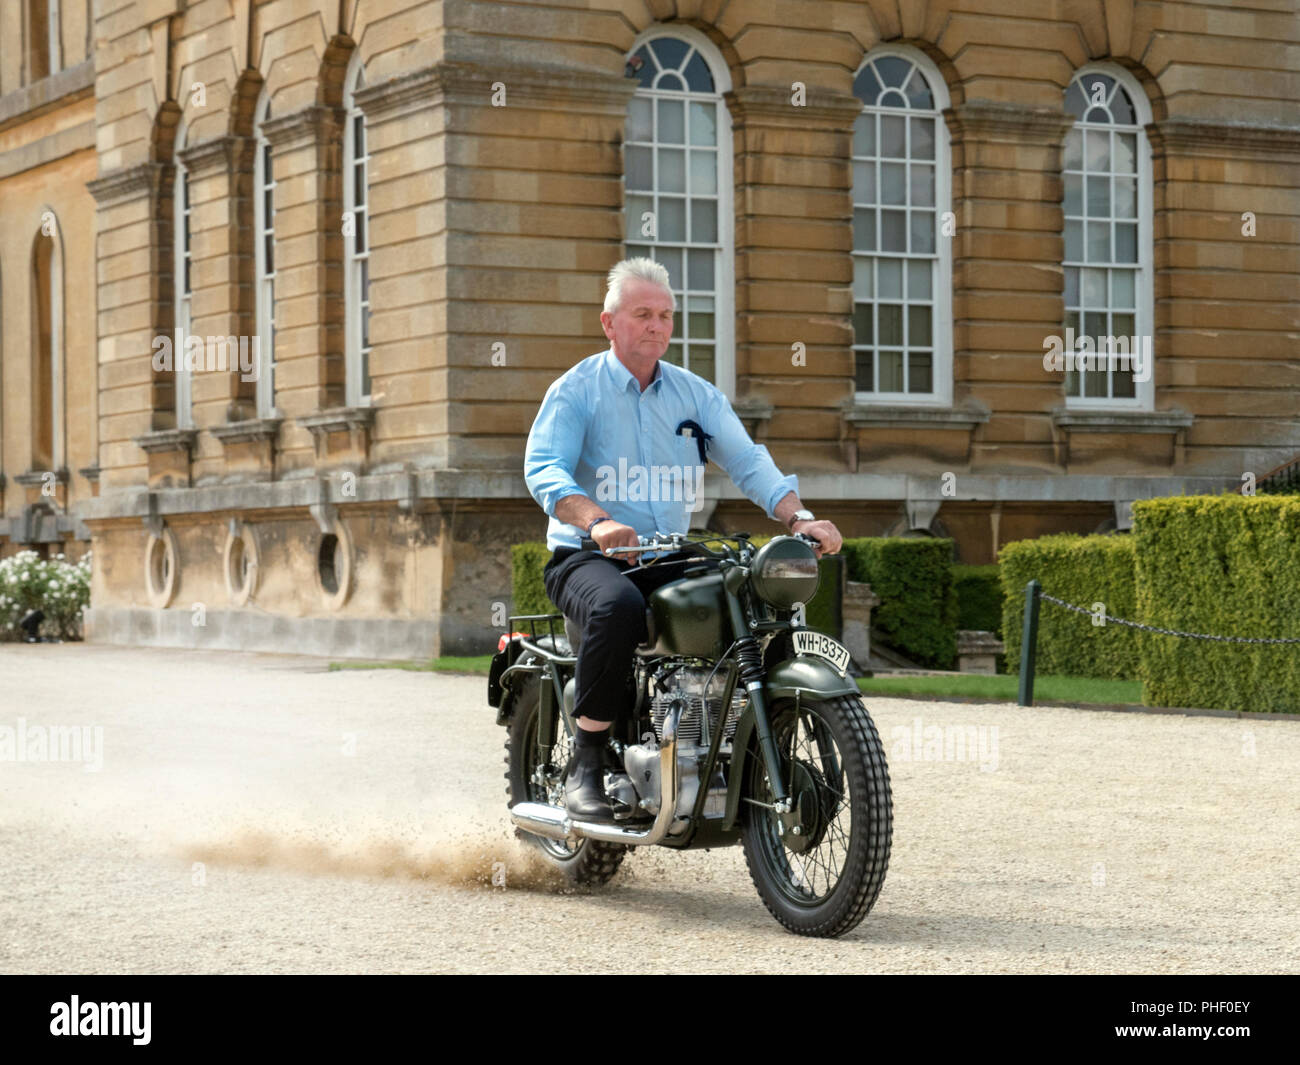 1962 Triumph TR6 motorcycle, bike famous ridden by Steve McQueen in film the Great Escape.  Salon Prive 2018 at Blenheim Palace Woodstock  UK Stock Photo